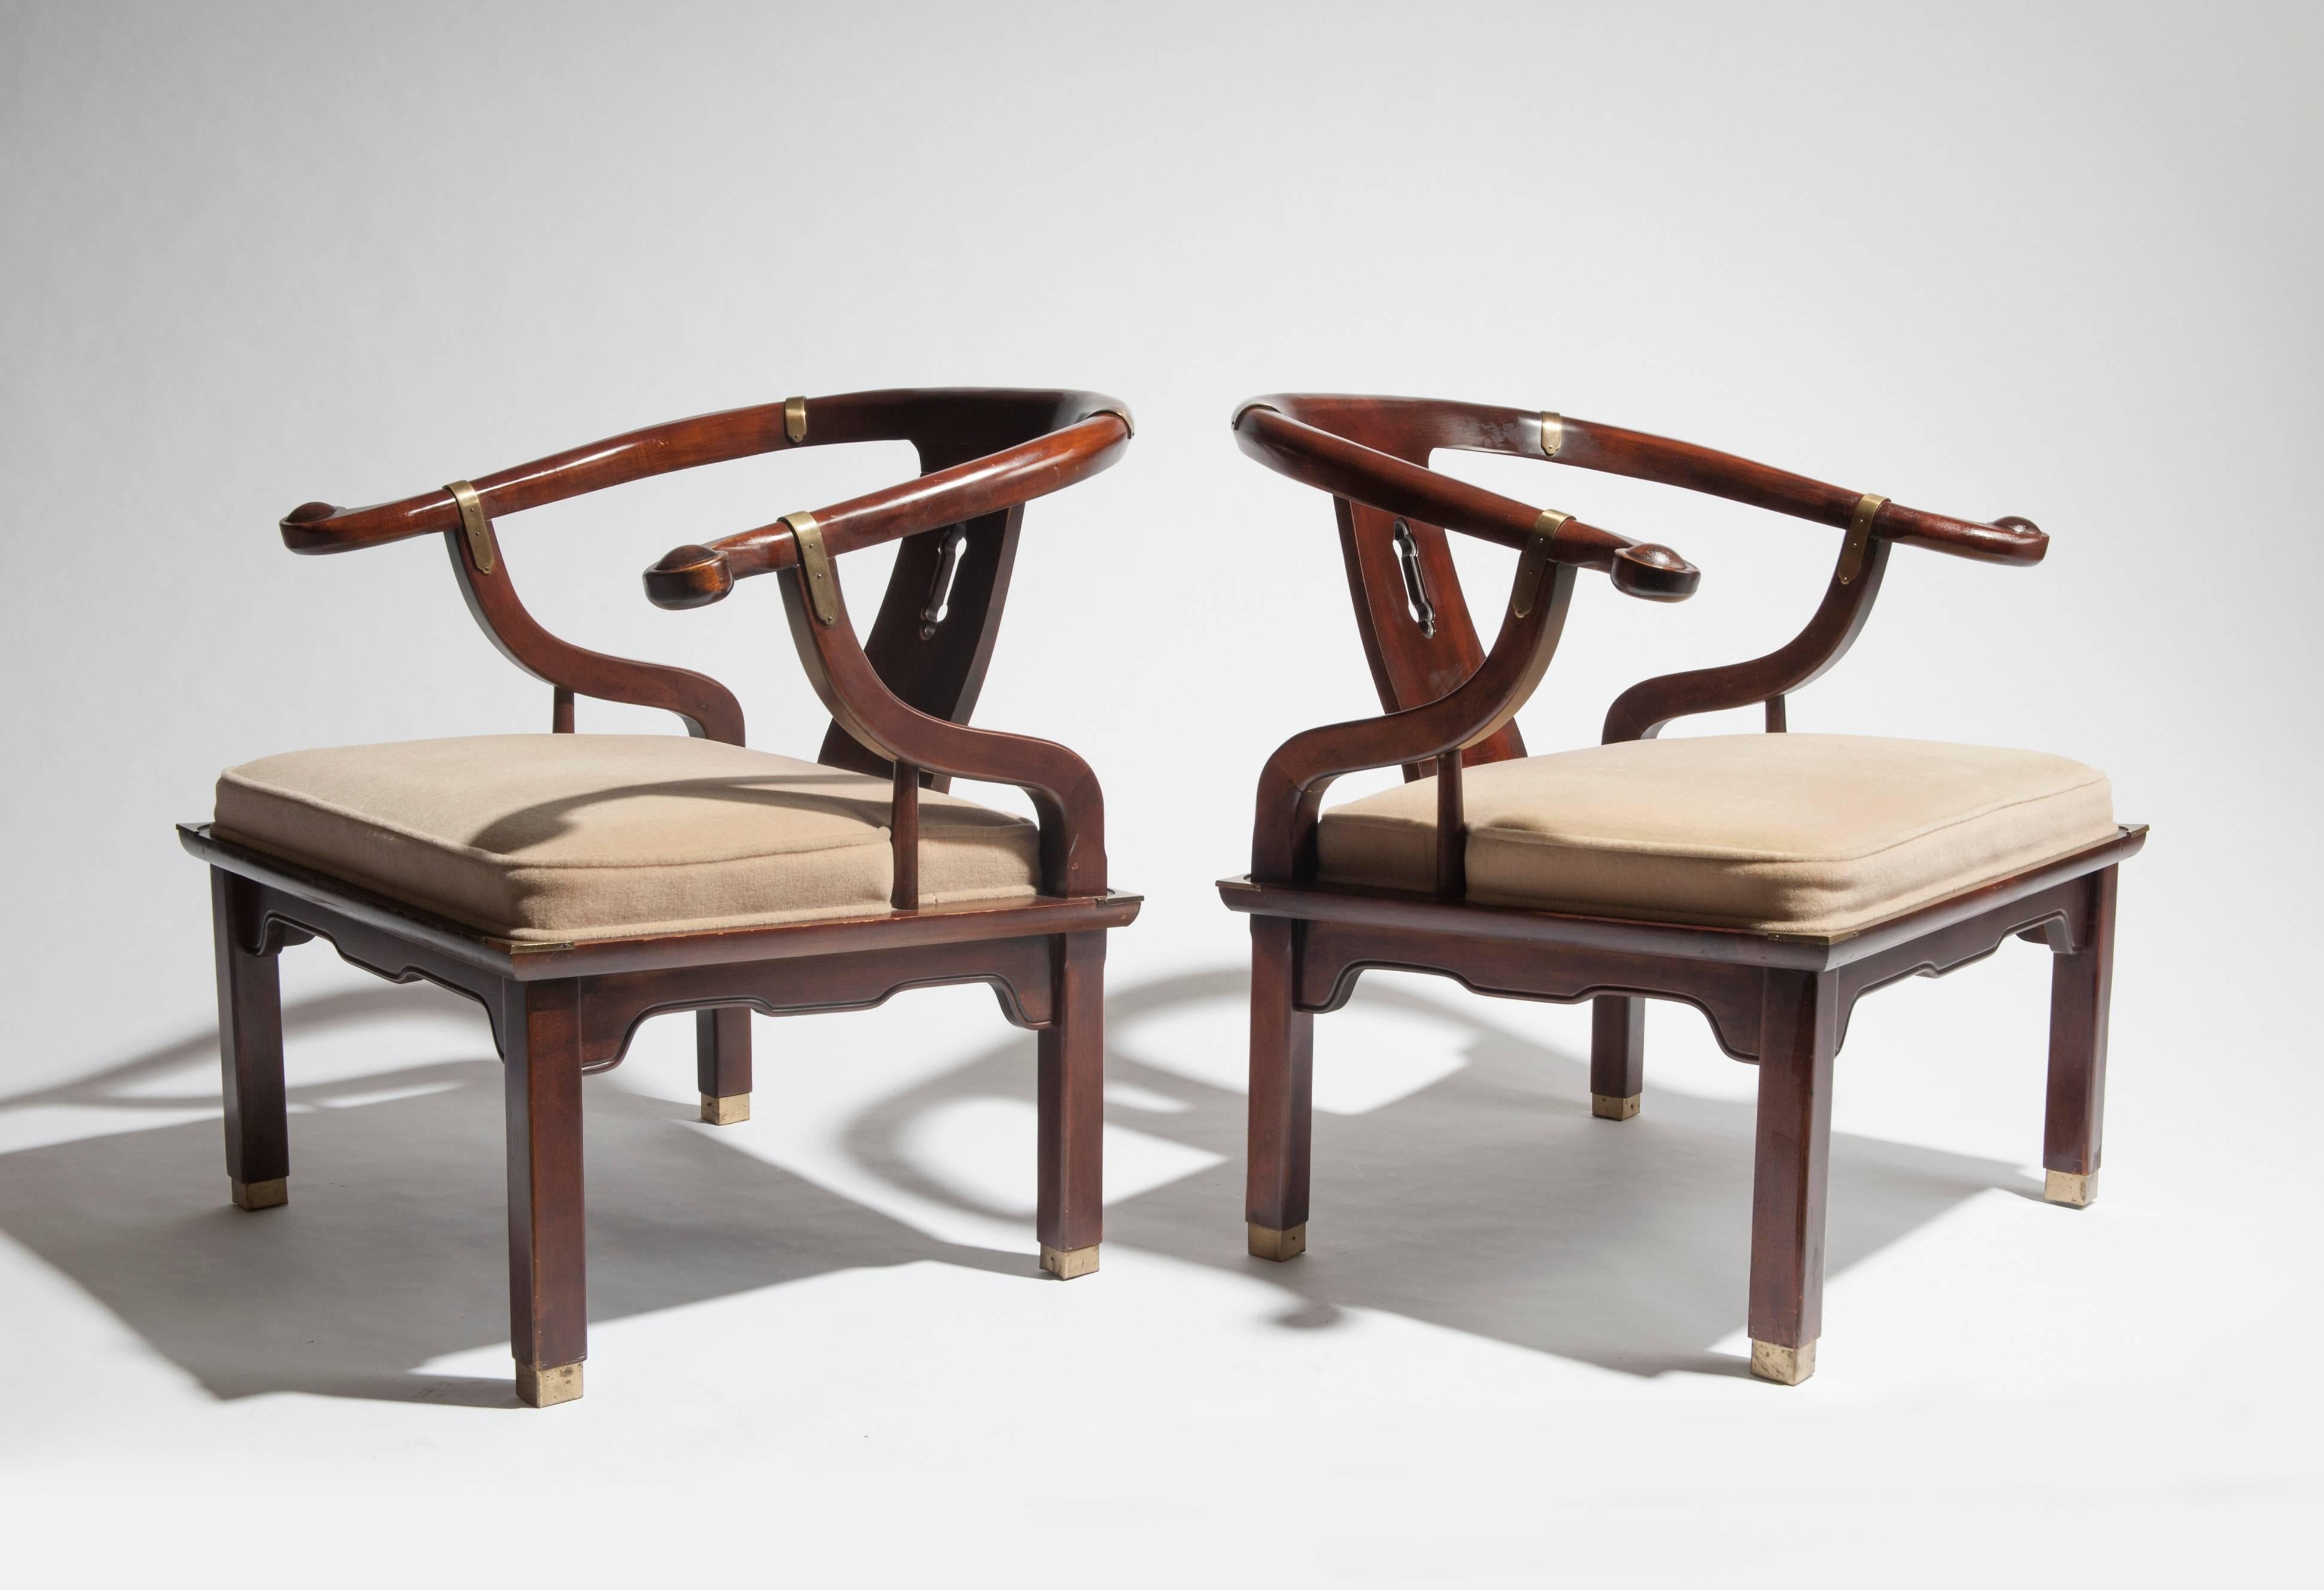 Appealing pair of Asian Ming inspired lounge chairs by Century Furniture. Chairs are substantial and quality built with solid wood and brass details.